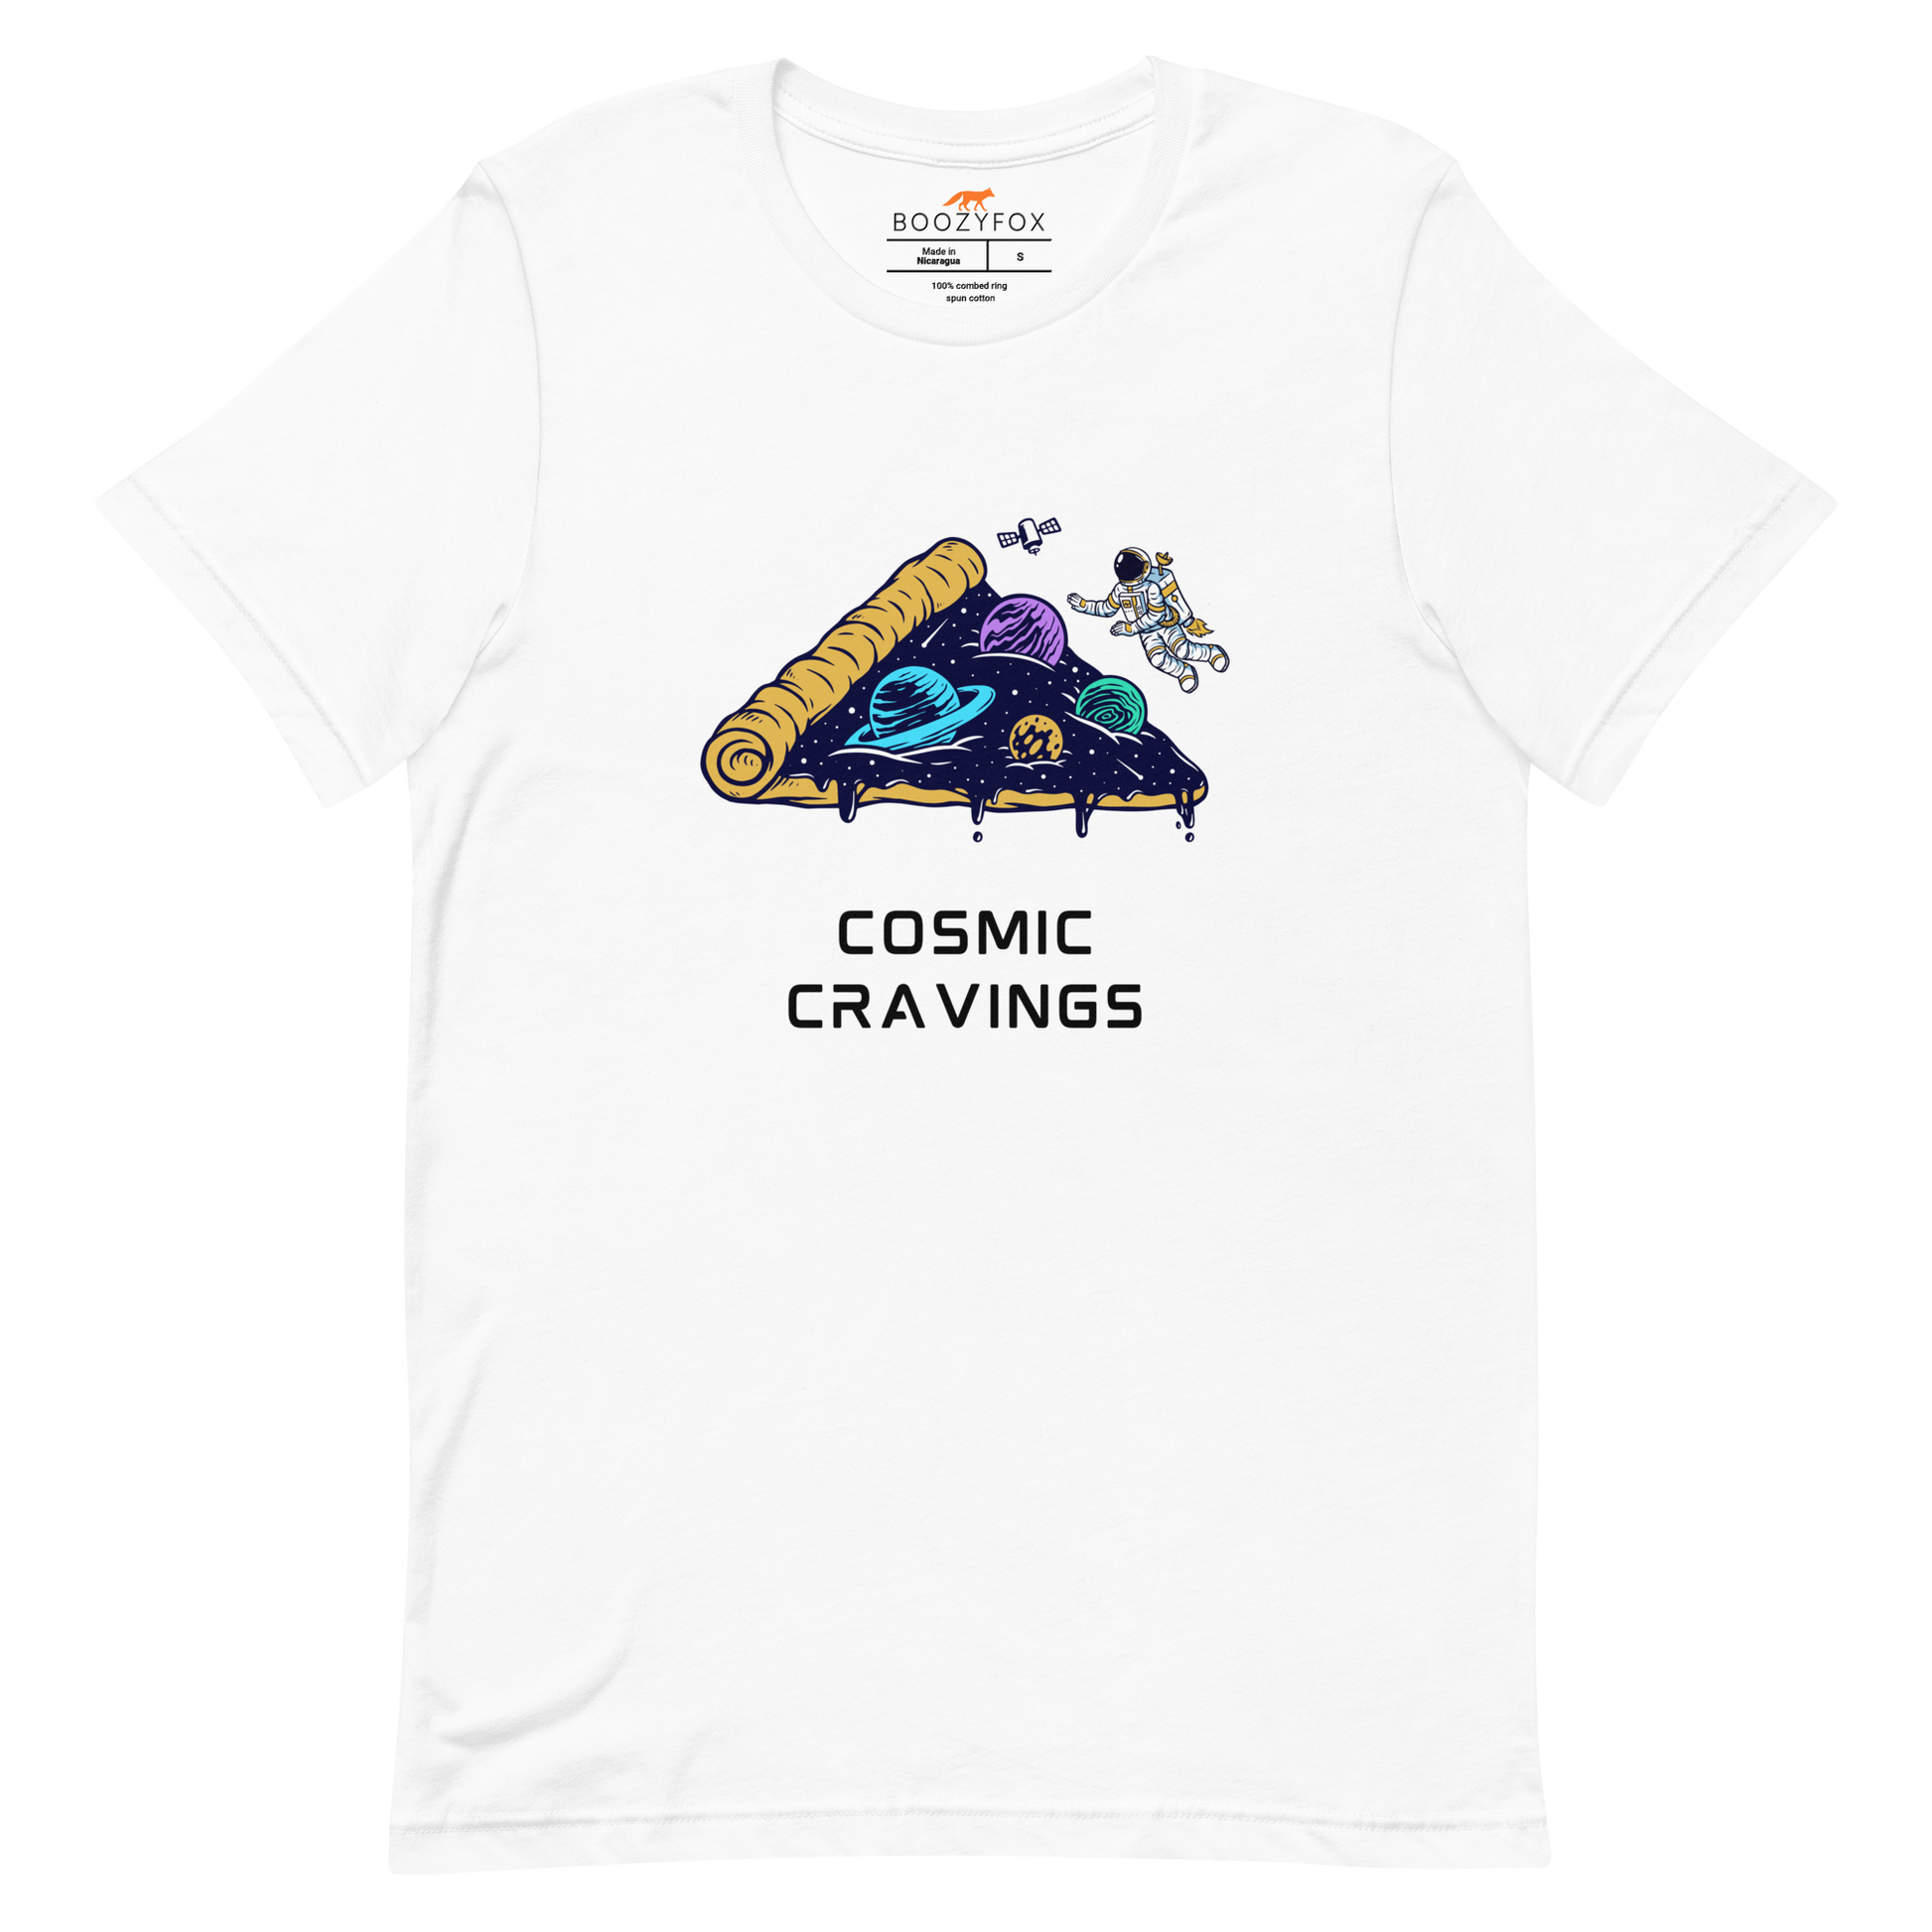 White Premium Cosmic Cravings Tee featuring an Astronaut Exploring a Pizza Universe graphic on the chest - Funny Graphic Space Tees - Boozy Fox